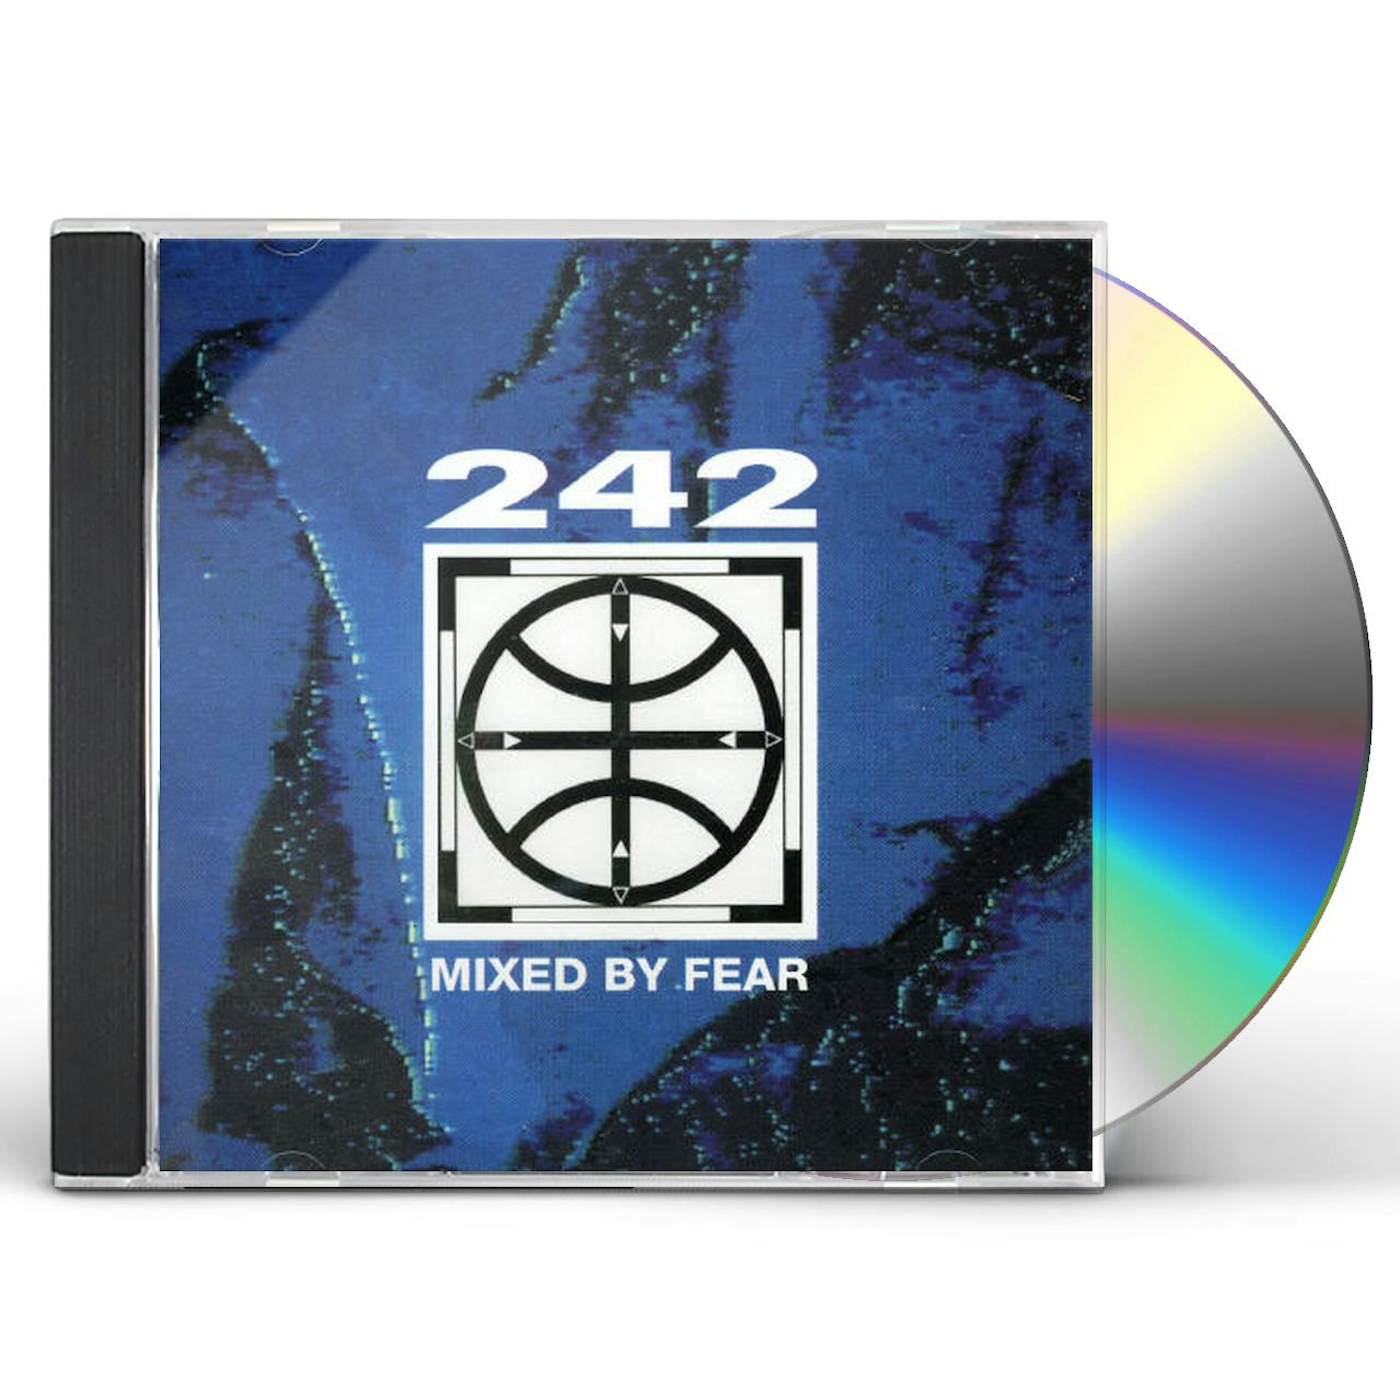 Front 242 MIXED BY FEAR CD